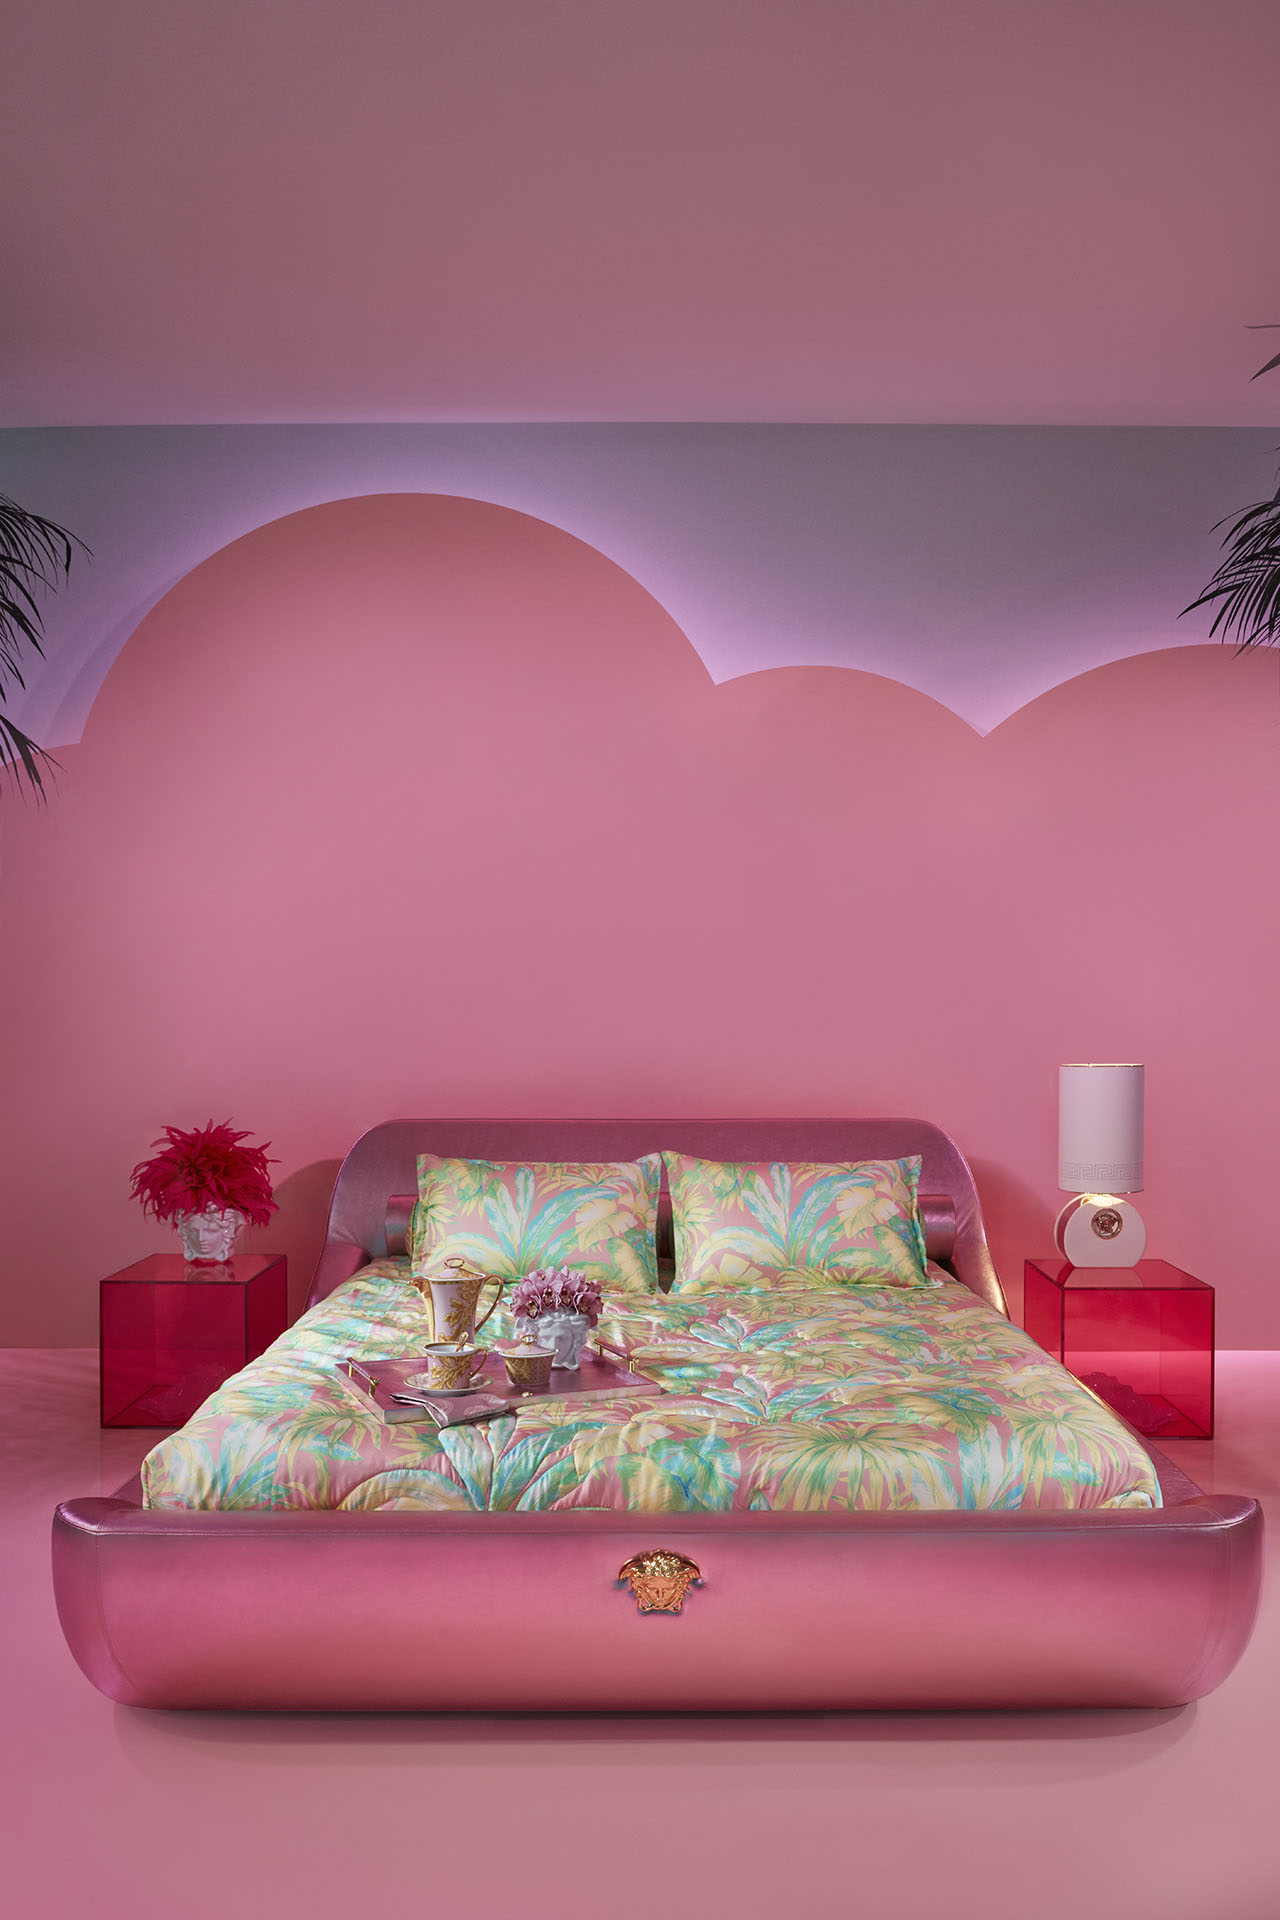 For the exhibition of the new 2019 Versace Home Collection in Via Gesù, Versace has collaborated with interior designer Sasha Bikoff and artist Andy Dixon. Photo © Versace.